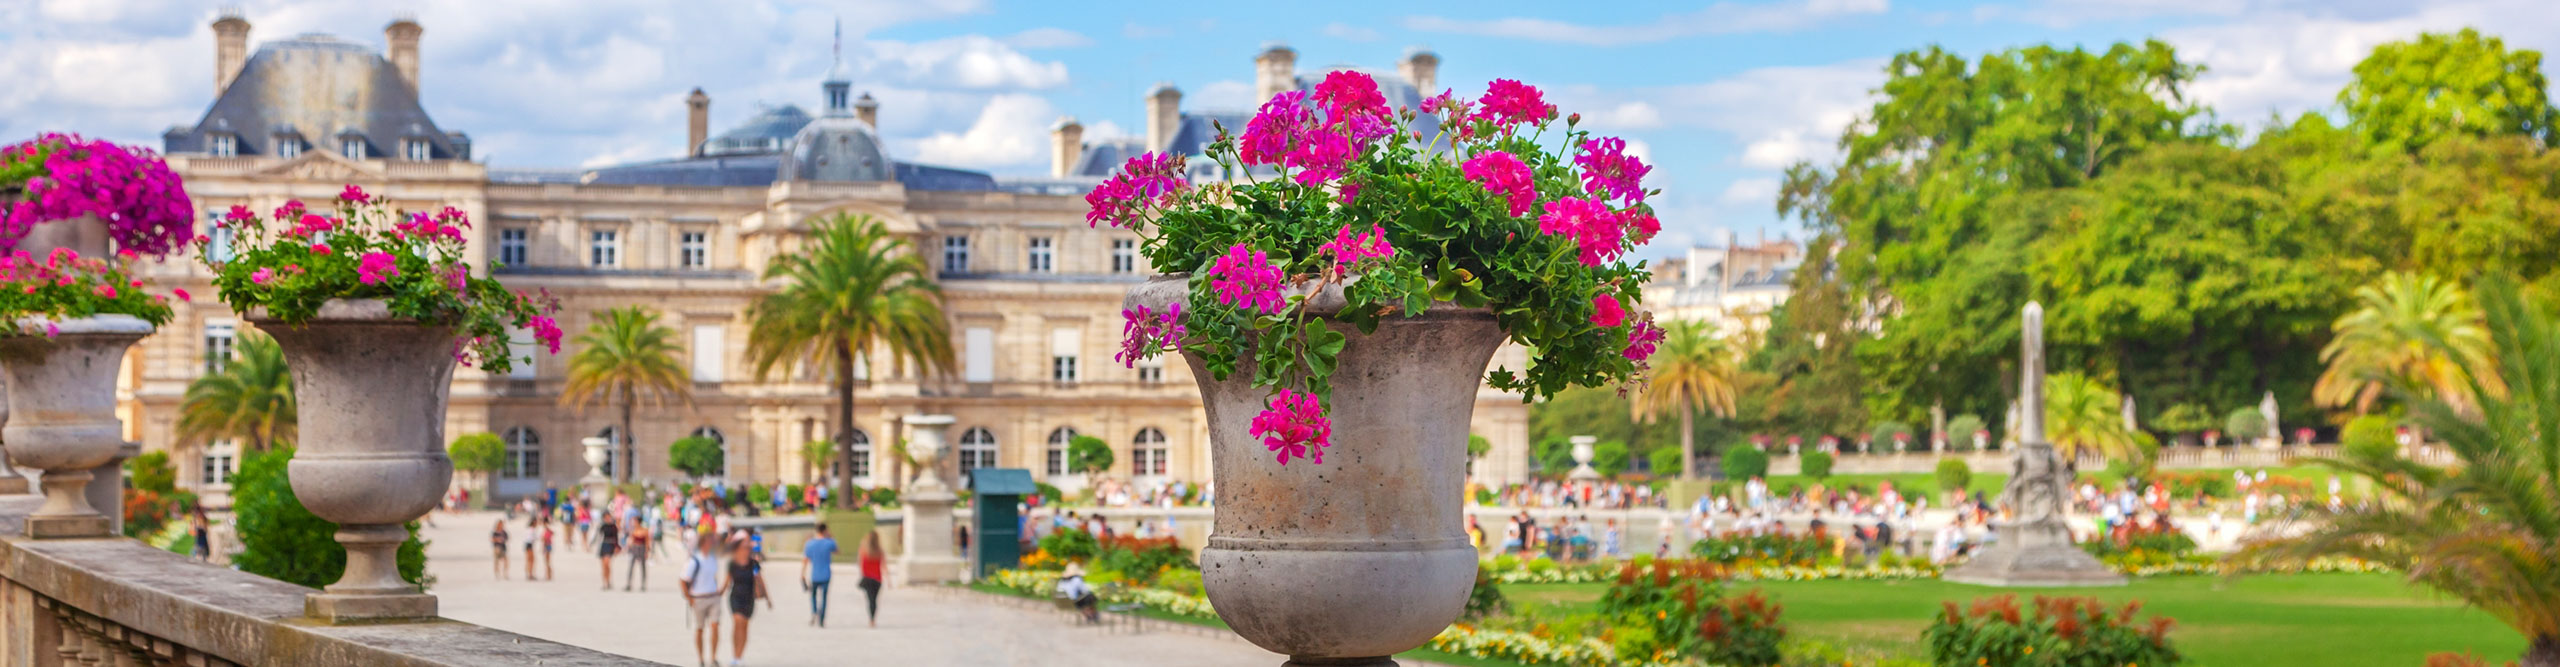 Flowers in the gardens of the Luxembourg Palace on a sunny day 